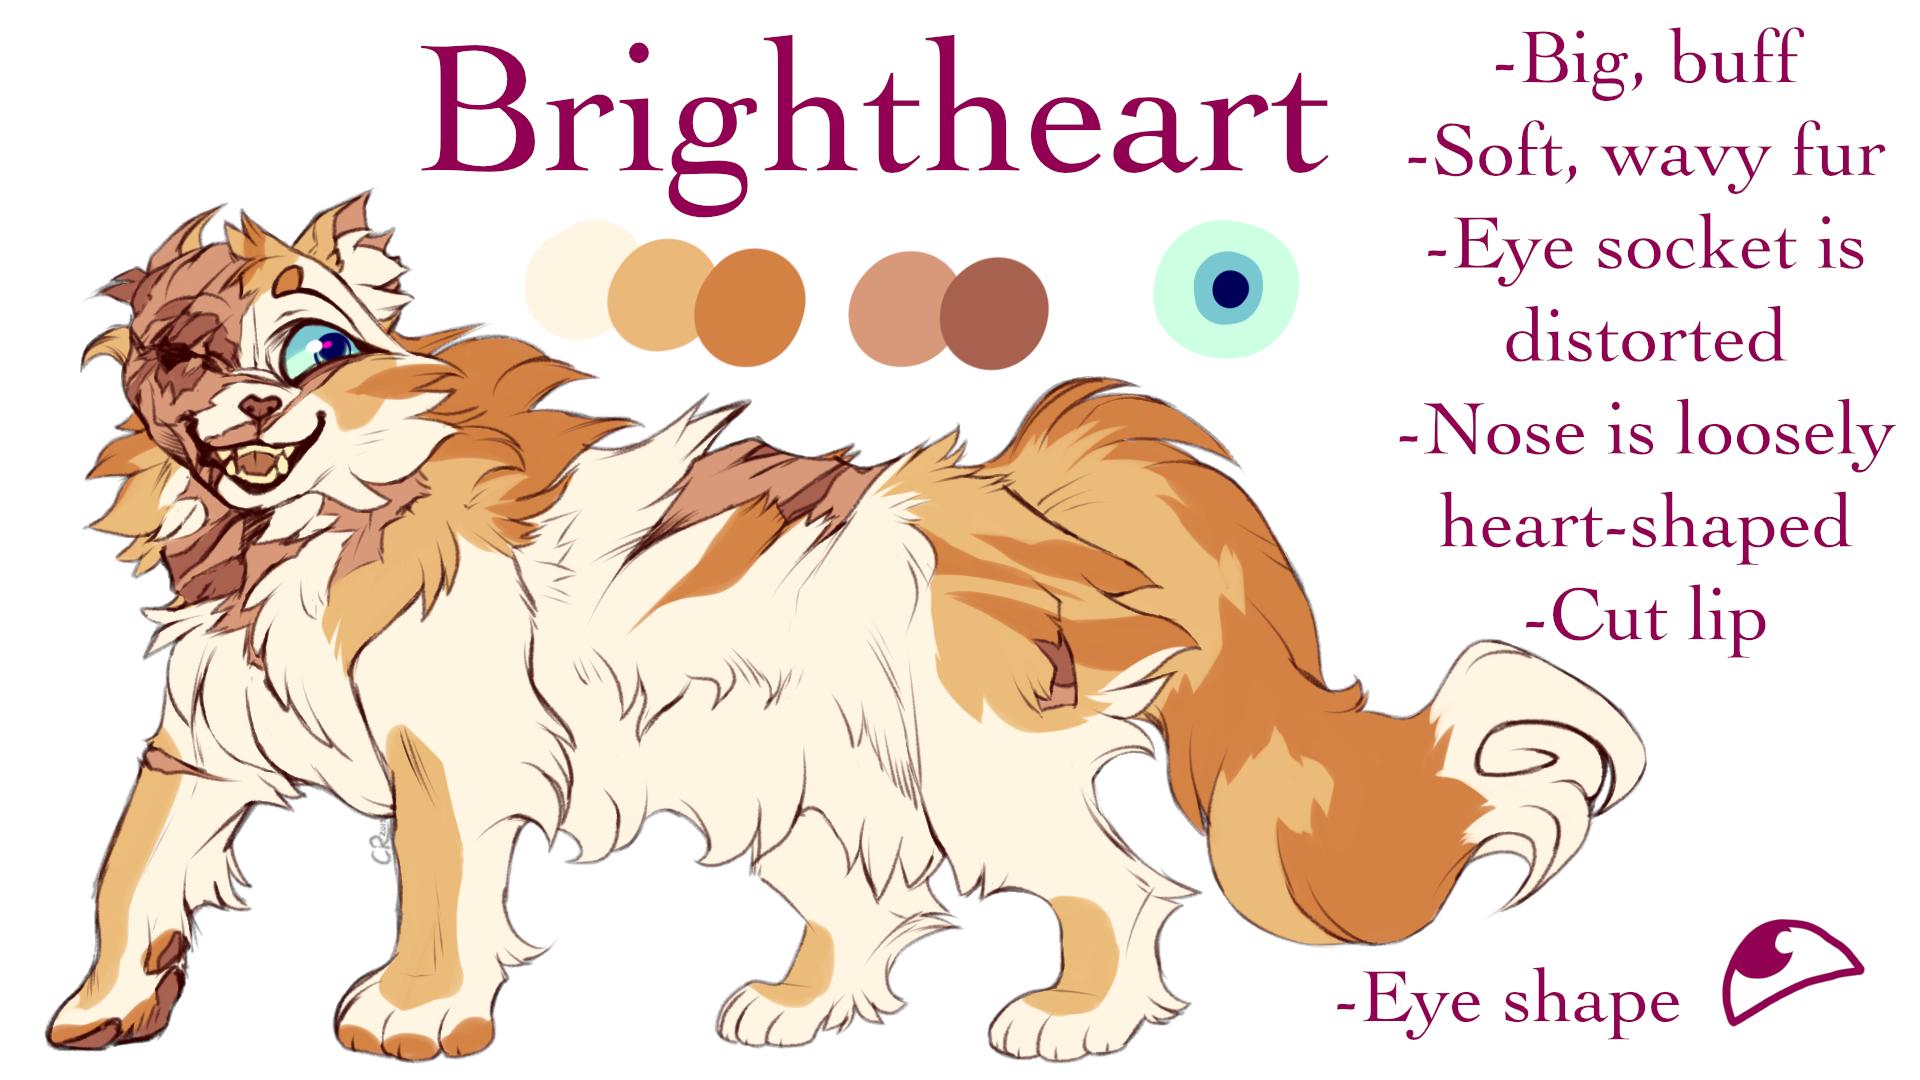 Cold Rising and Brightheart designs; They'll both be featured in an upcoming piece so keep an eye out! Love the bond these two had